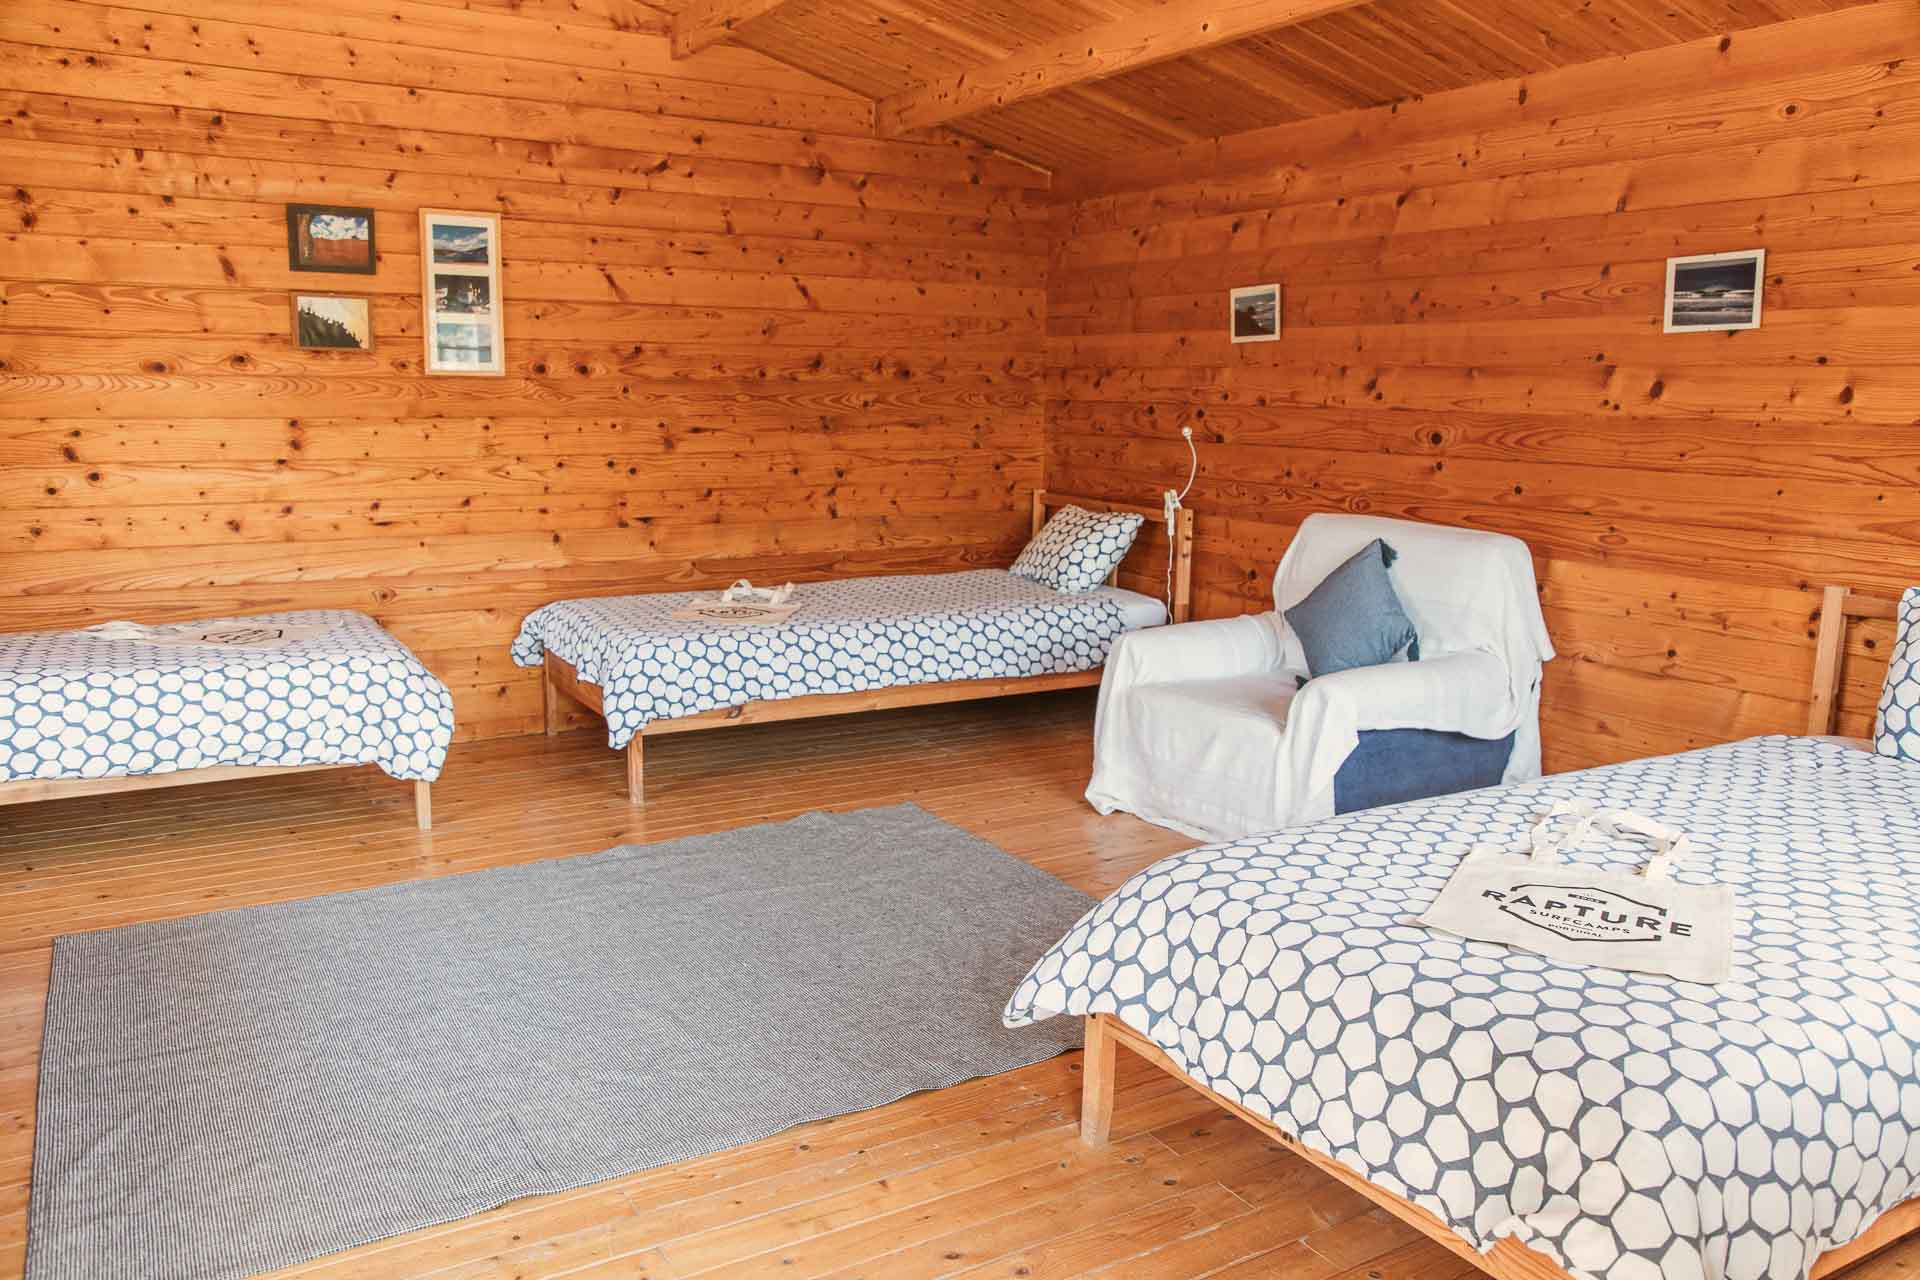 surfcamp shared room 3 single beds and sofa with rustic decor